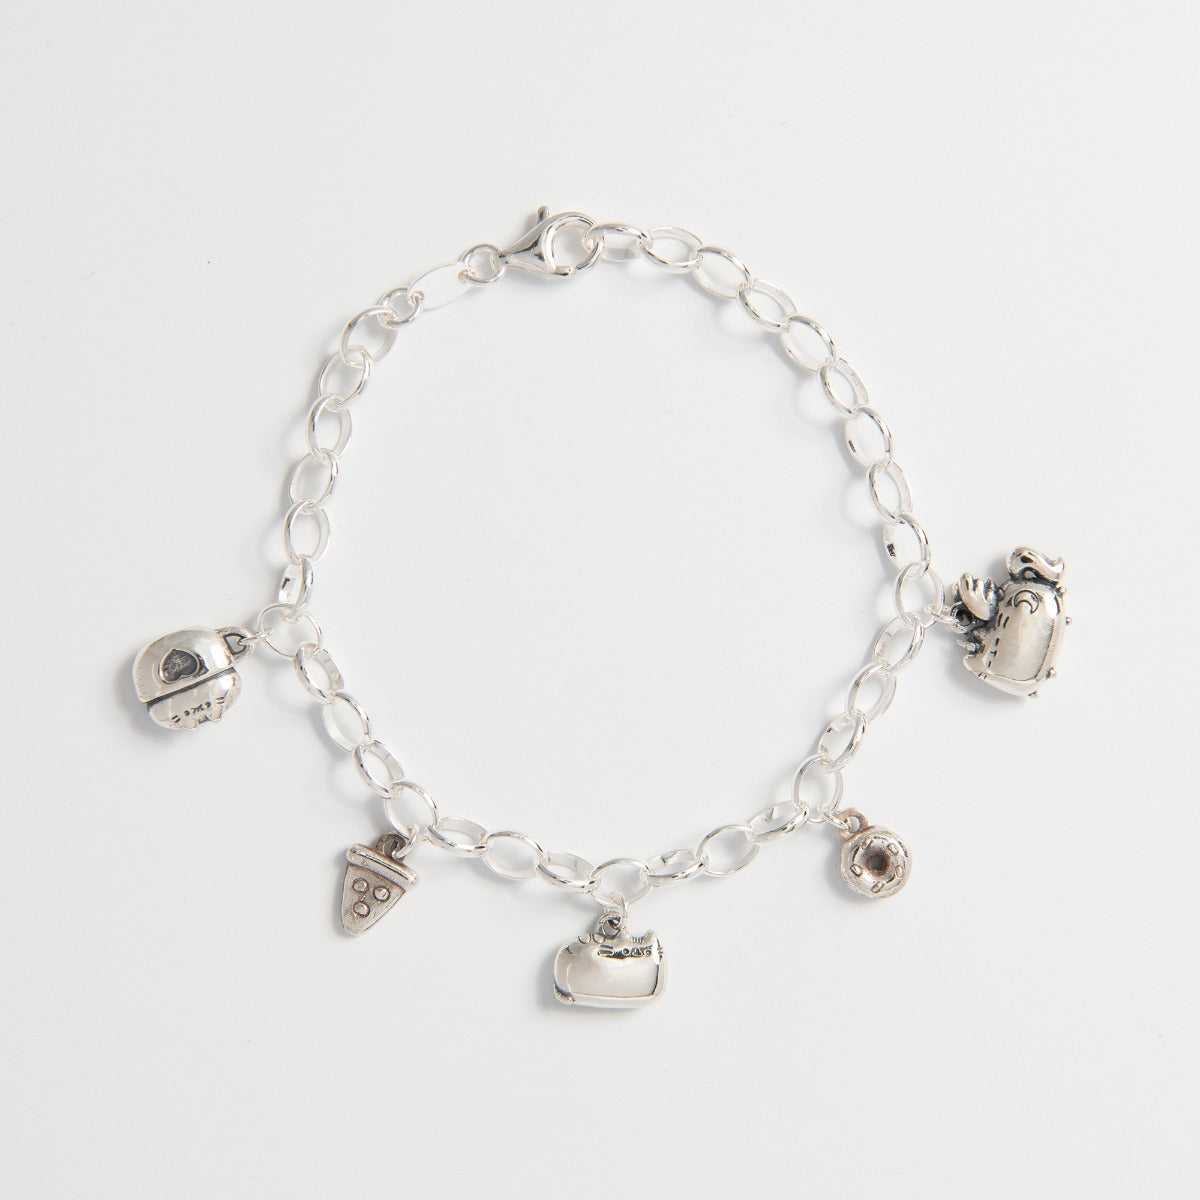 Pusheen Charm Bracelet with her favourite snacks